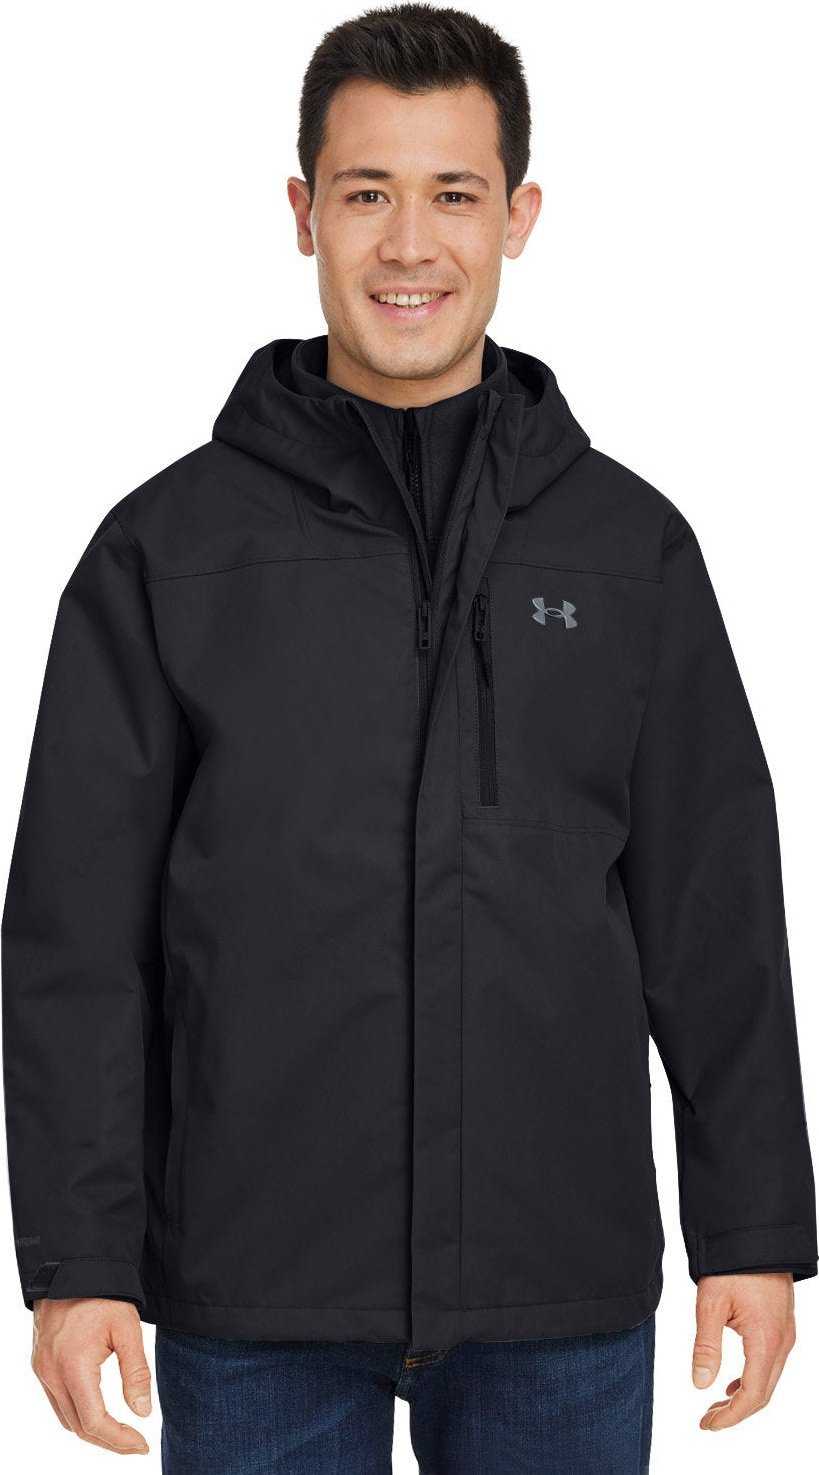 Under Armour 1371585 Mens Porter 3-In-1 2.0 Jacket - Black Pitch Gray